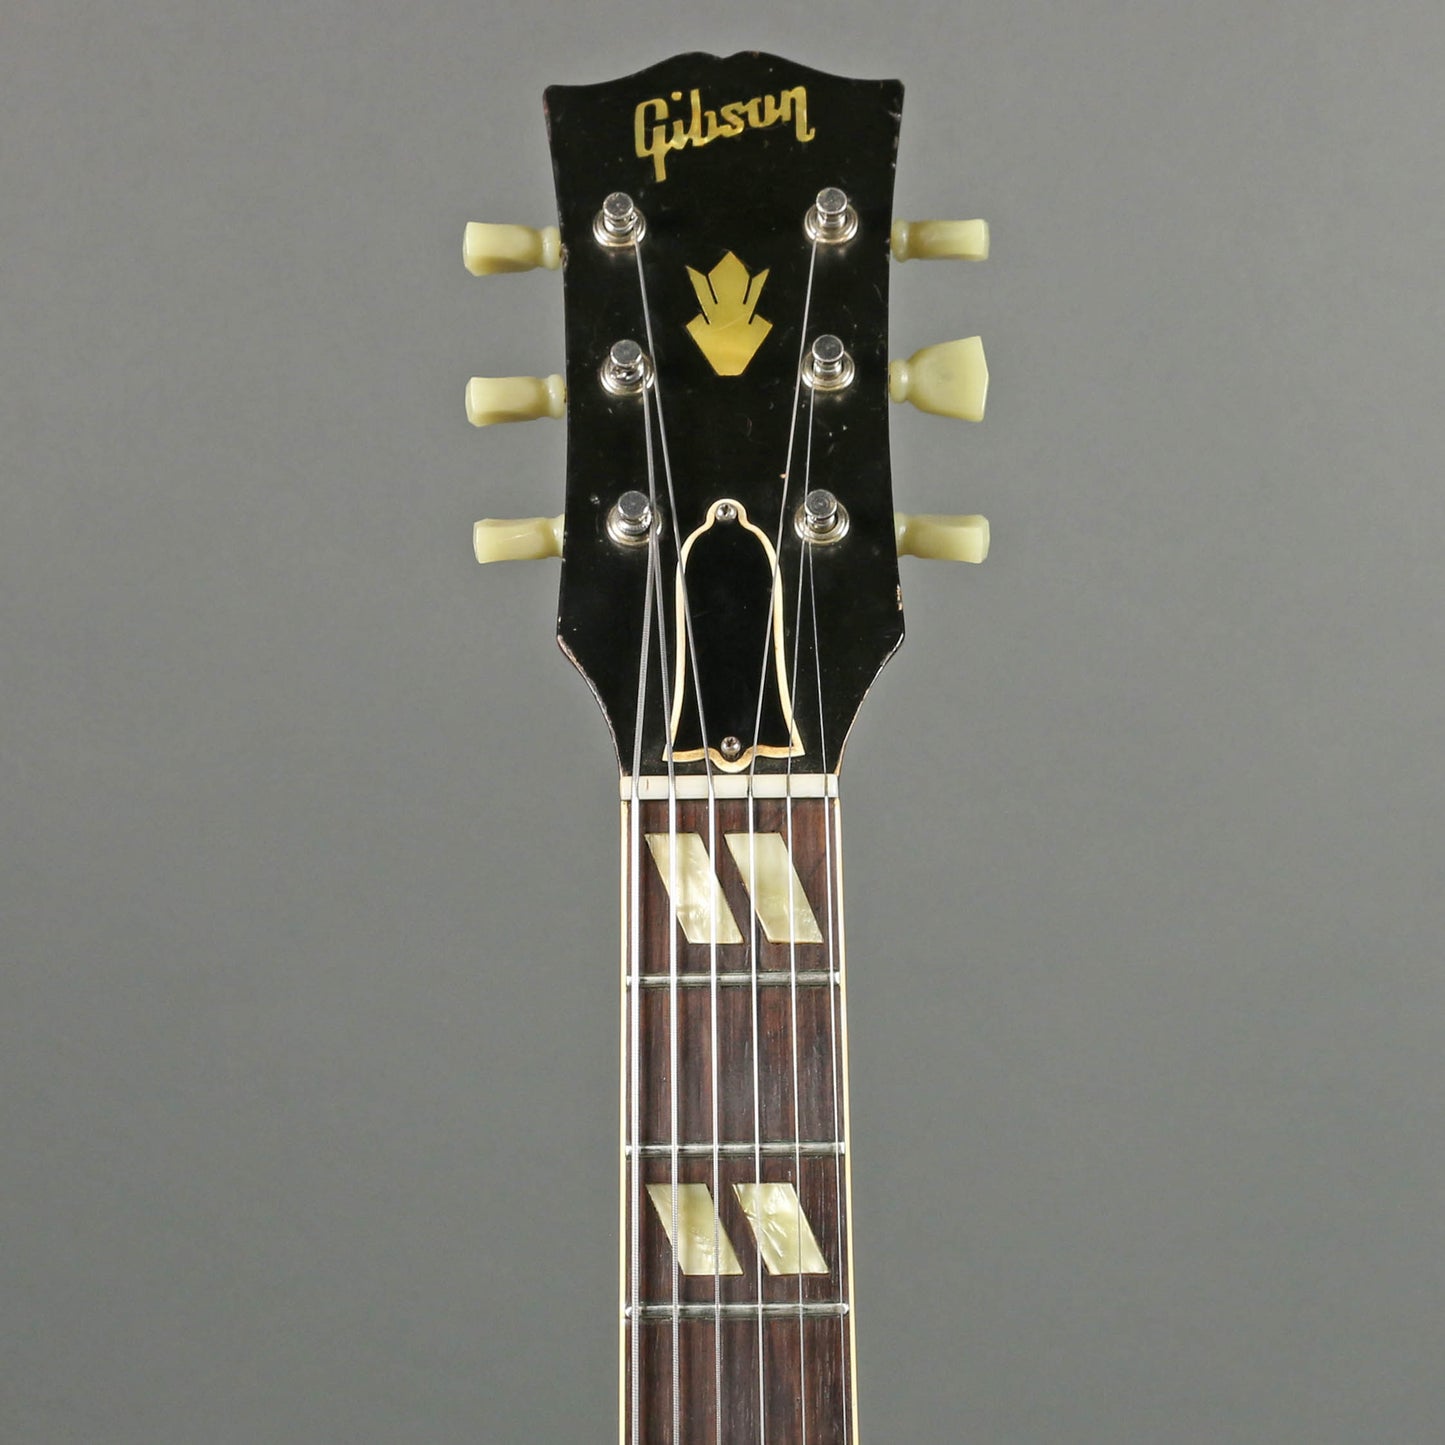 *HOLD* 1962 Gibson ES-175D